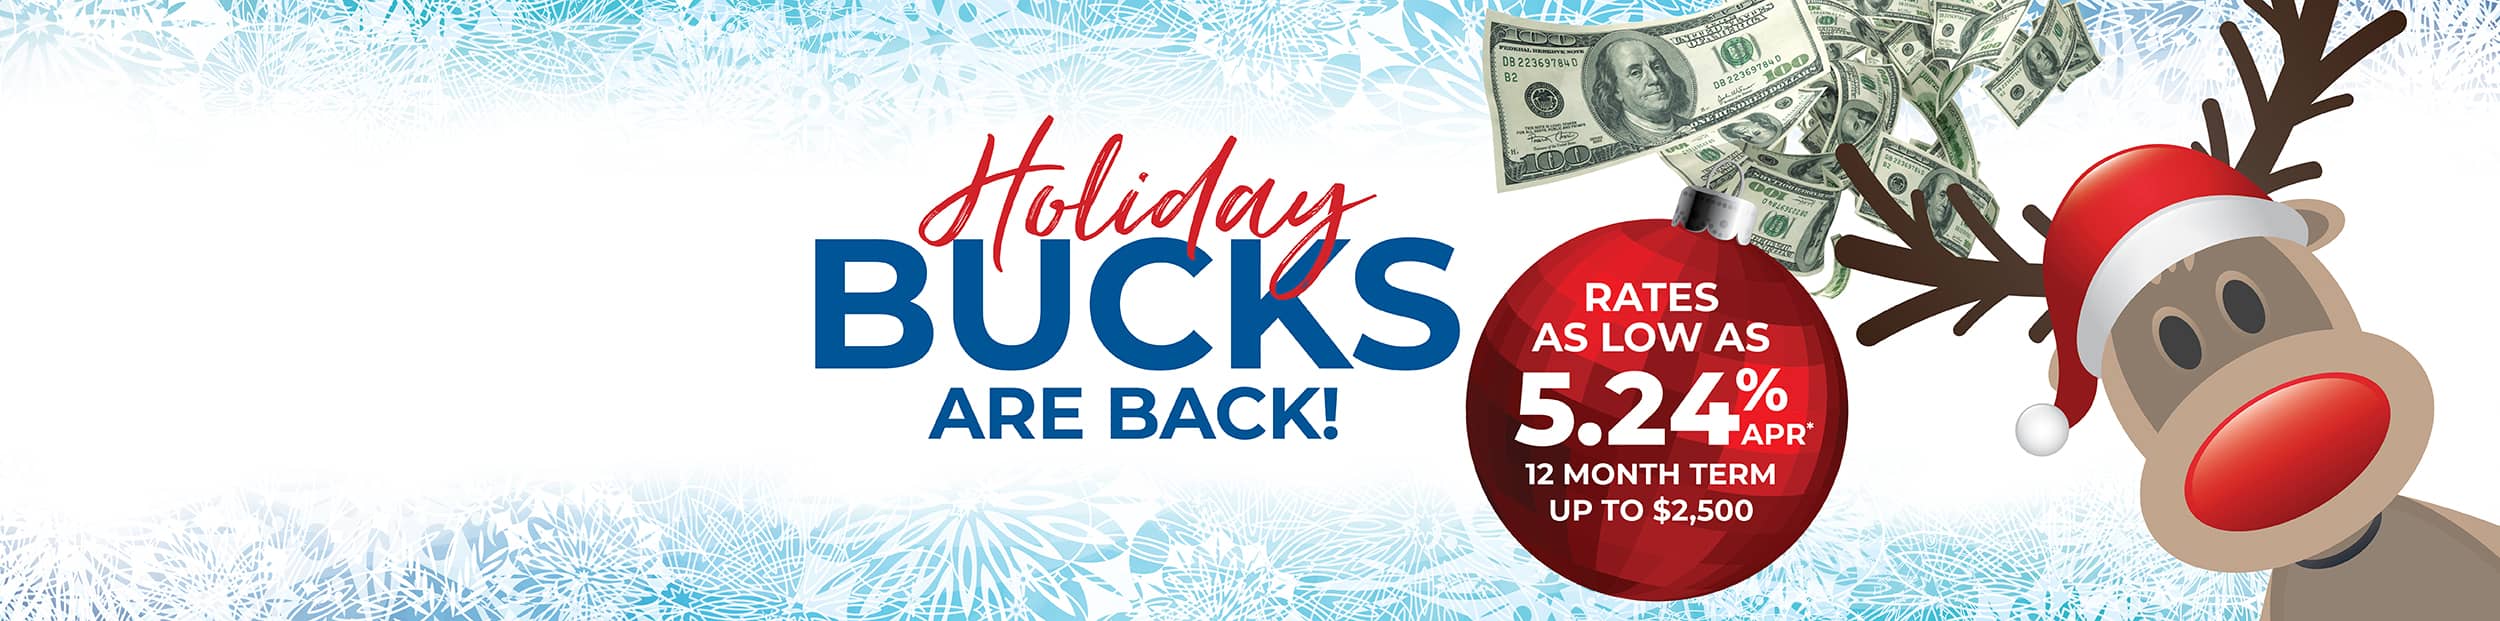 Holiday bucks home page banner featuring a red nose reindeer wearing a santa clause hat.